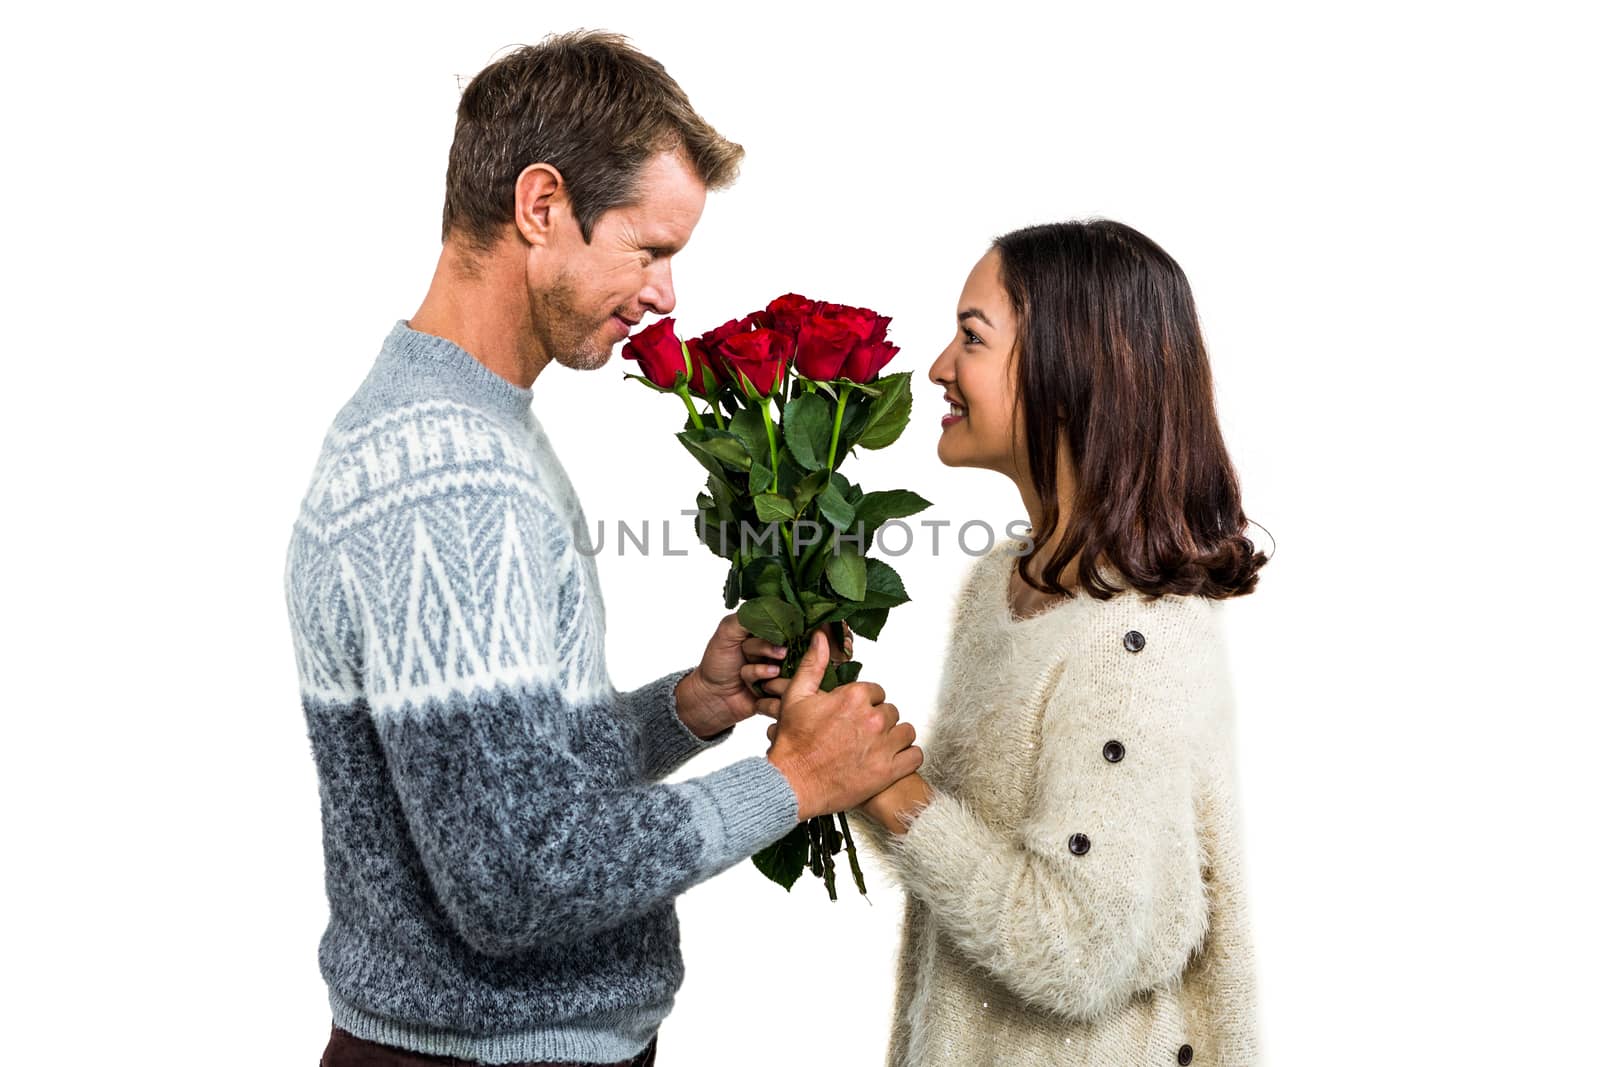 Romantic couple holding red roses against white background